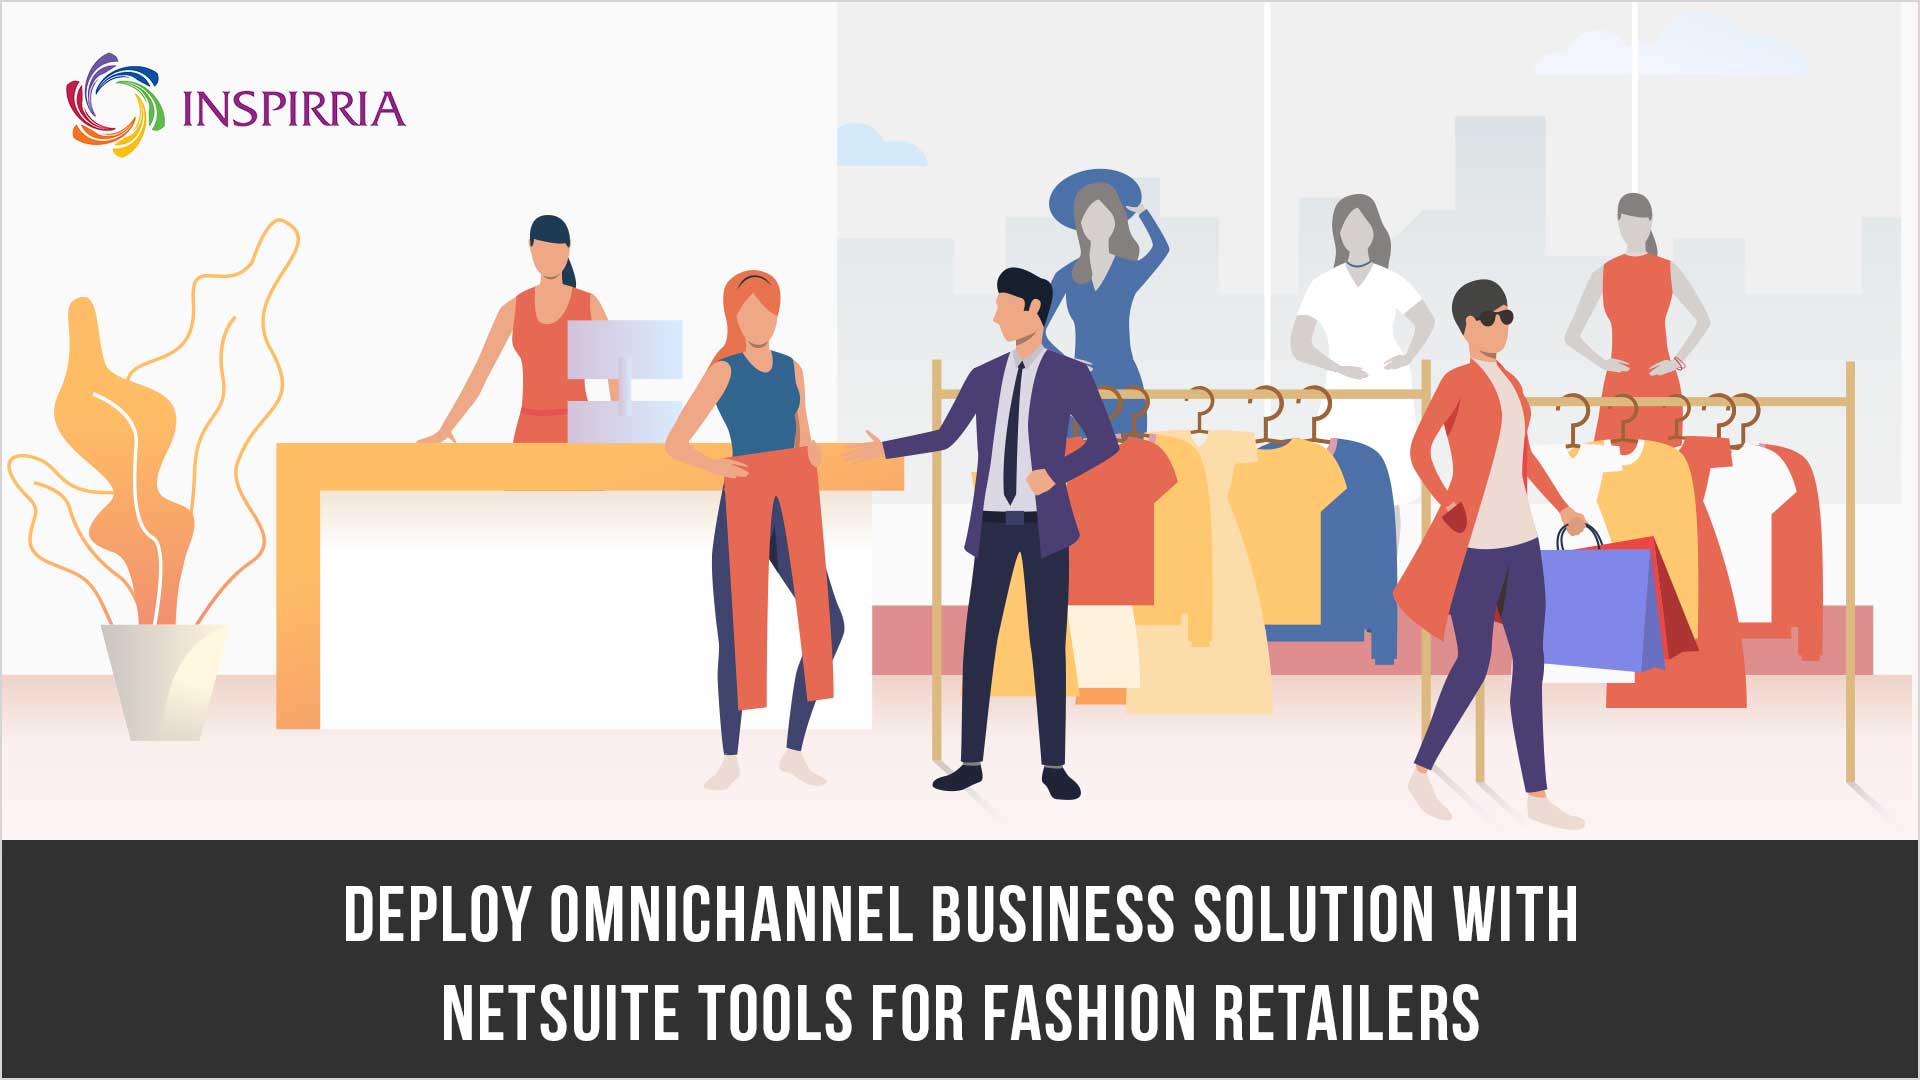 NetSuite Tools for Fashion Retailers